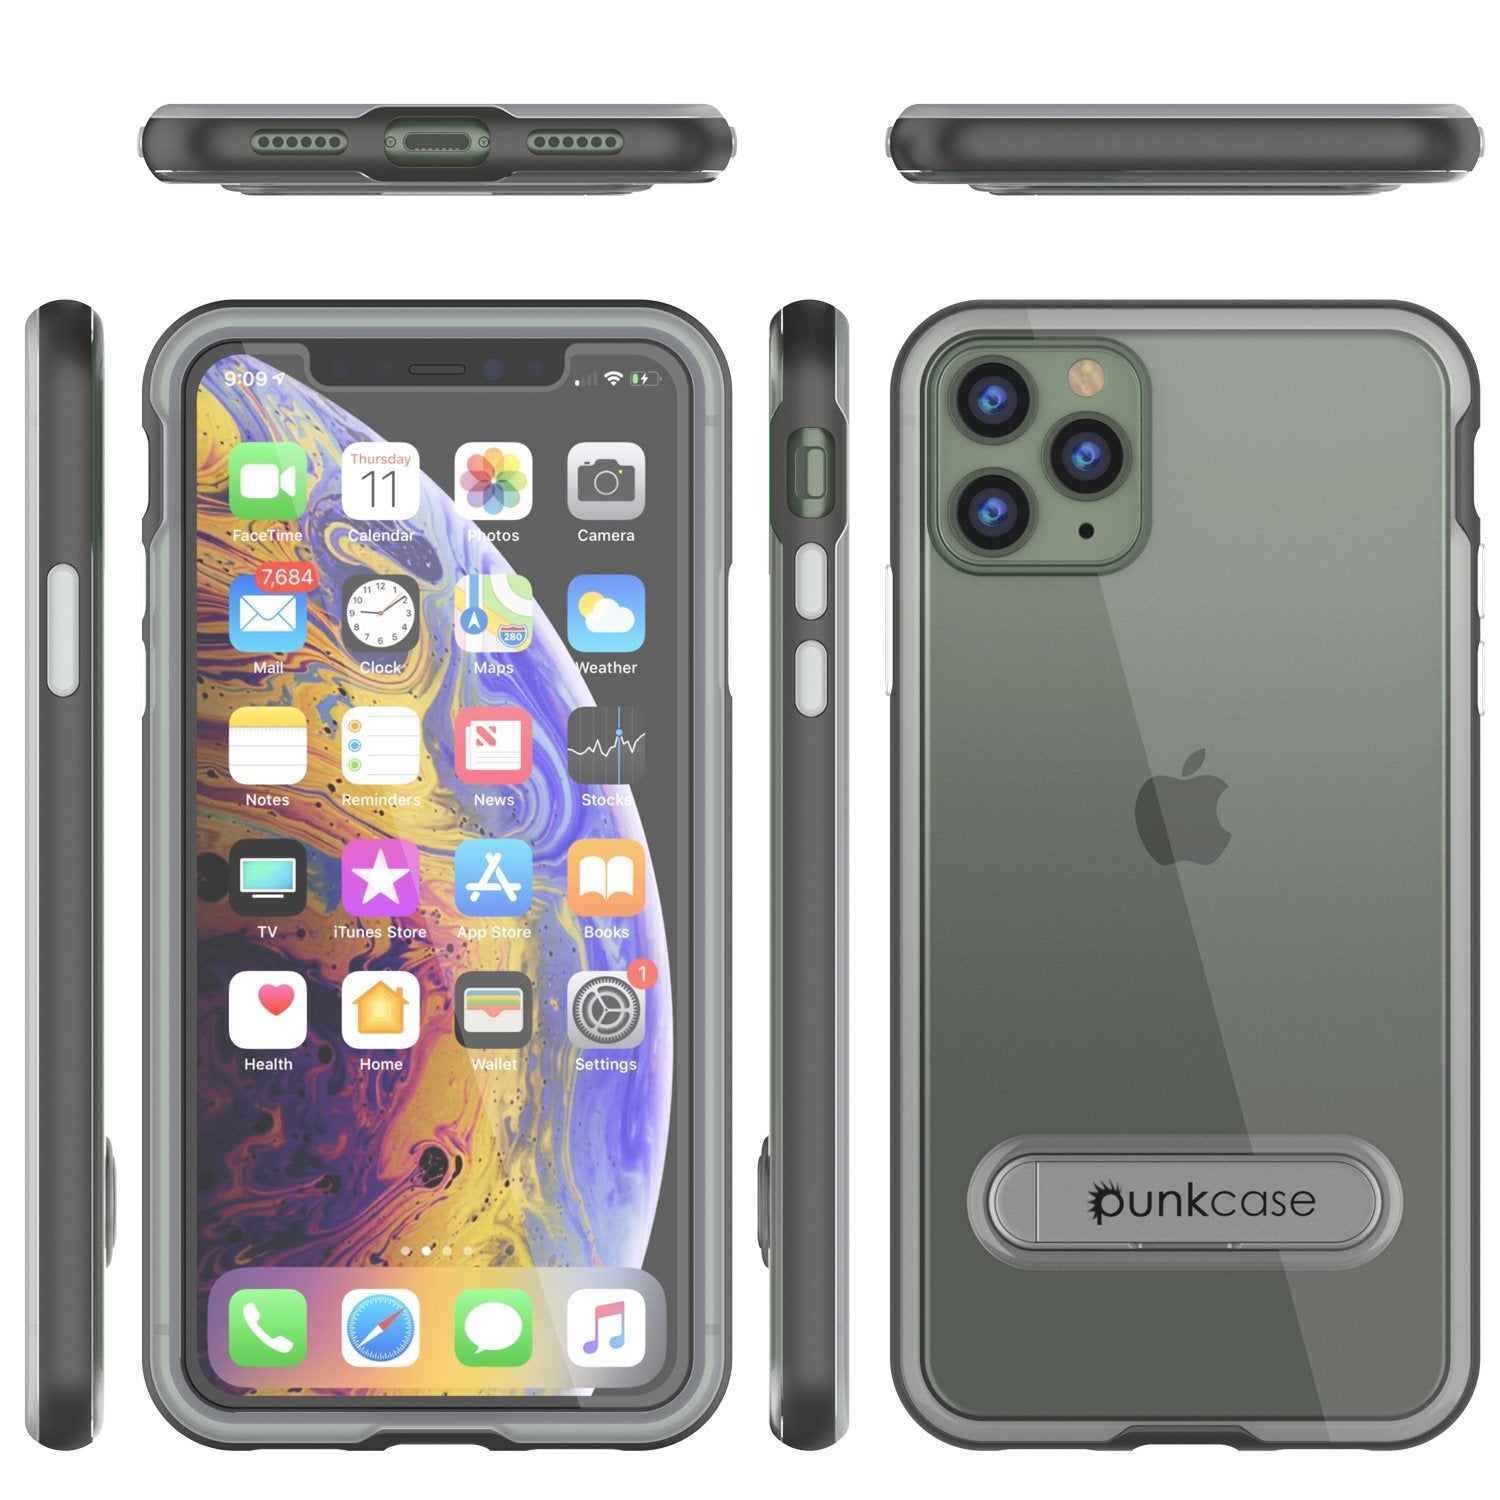 iPhone 12 Pro Max Case, PUNKcase [LUCID 3.0 Series] [Slim Fit] Protective Cover w/ Integrated Screen Protector [Grey]